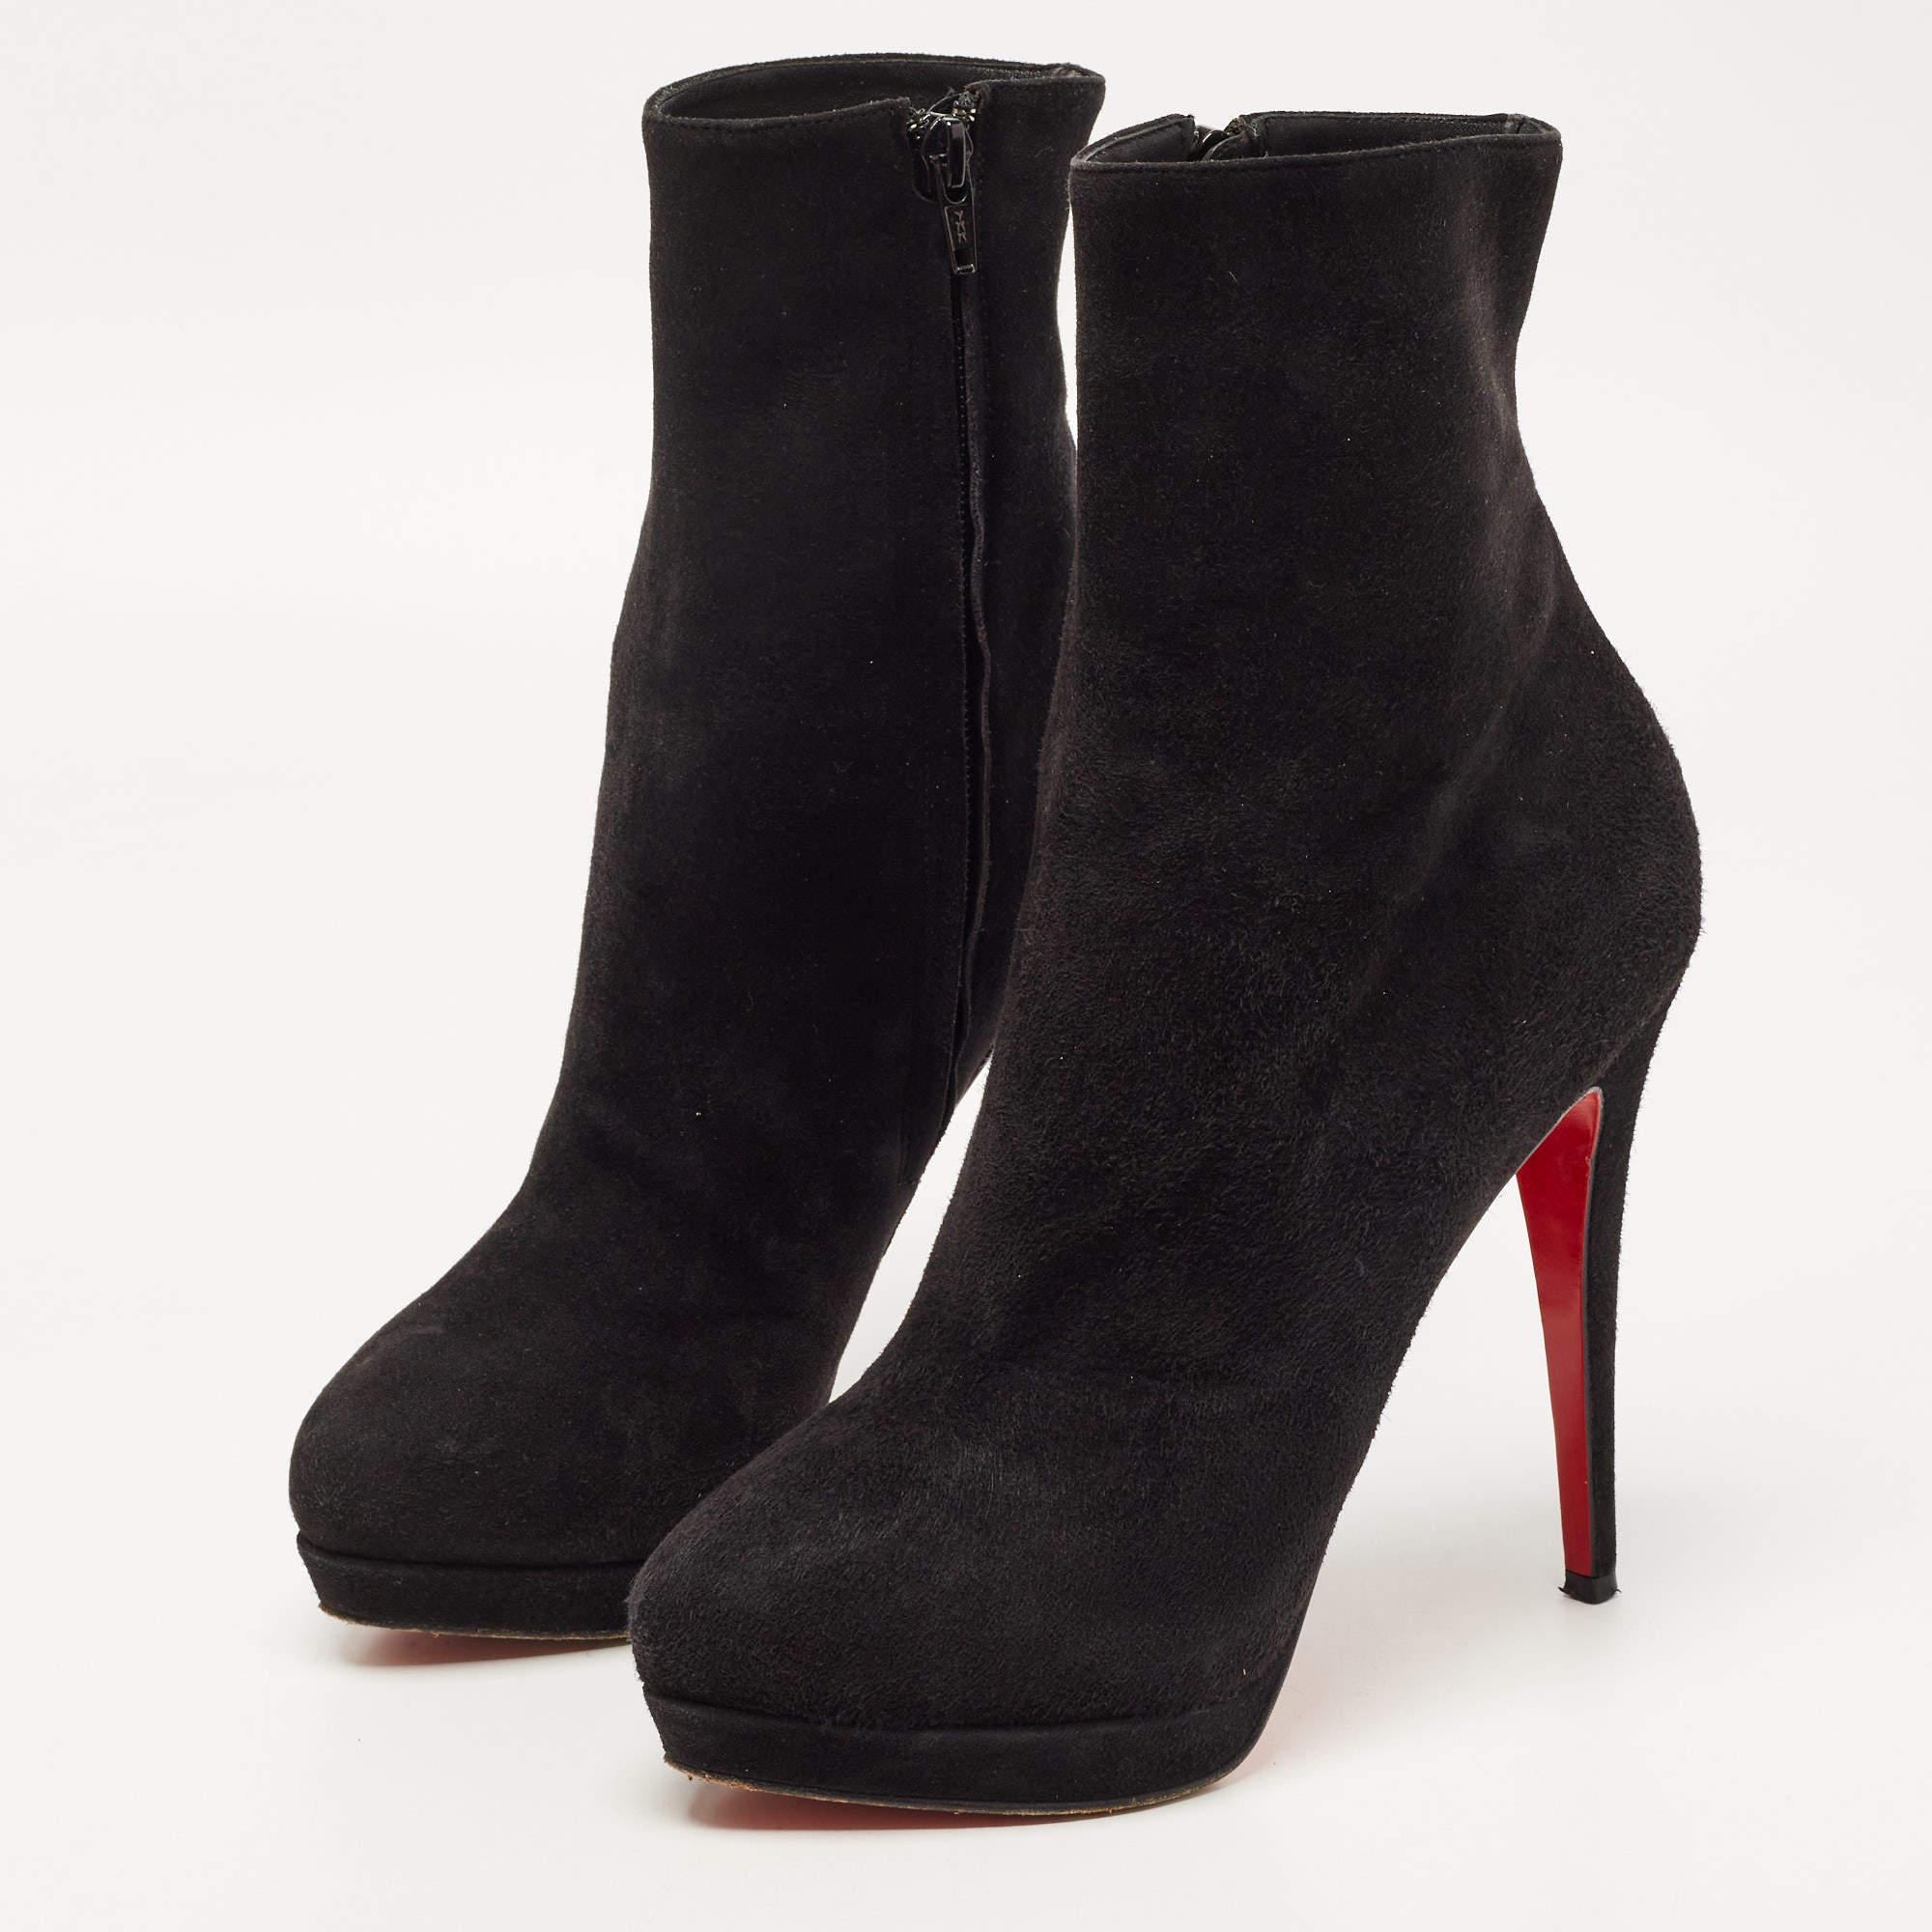 Women's Christian Louboutin Black Suede Belle Ankle Boots Size 39